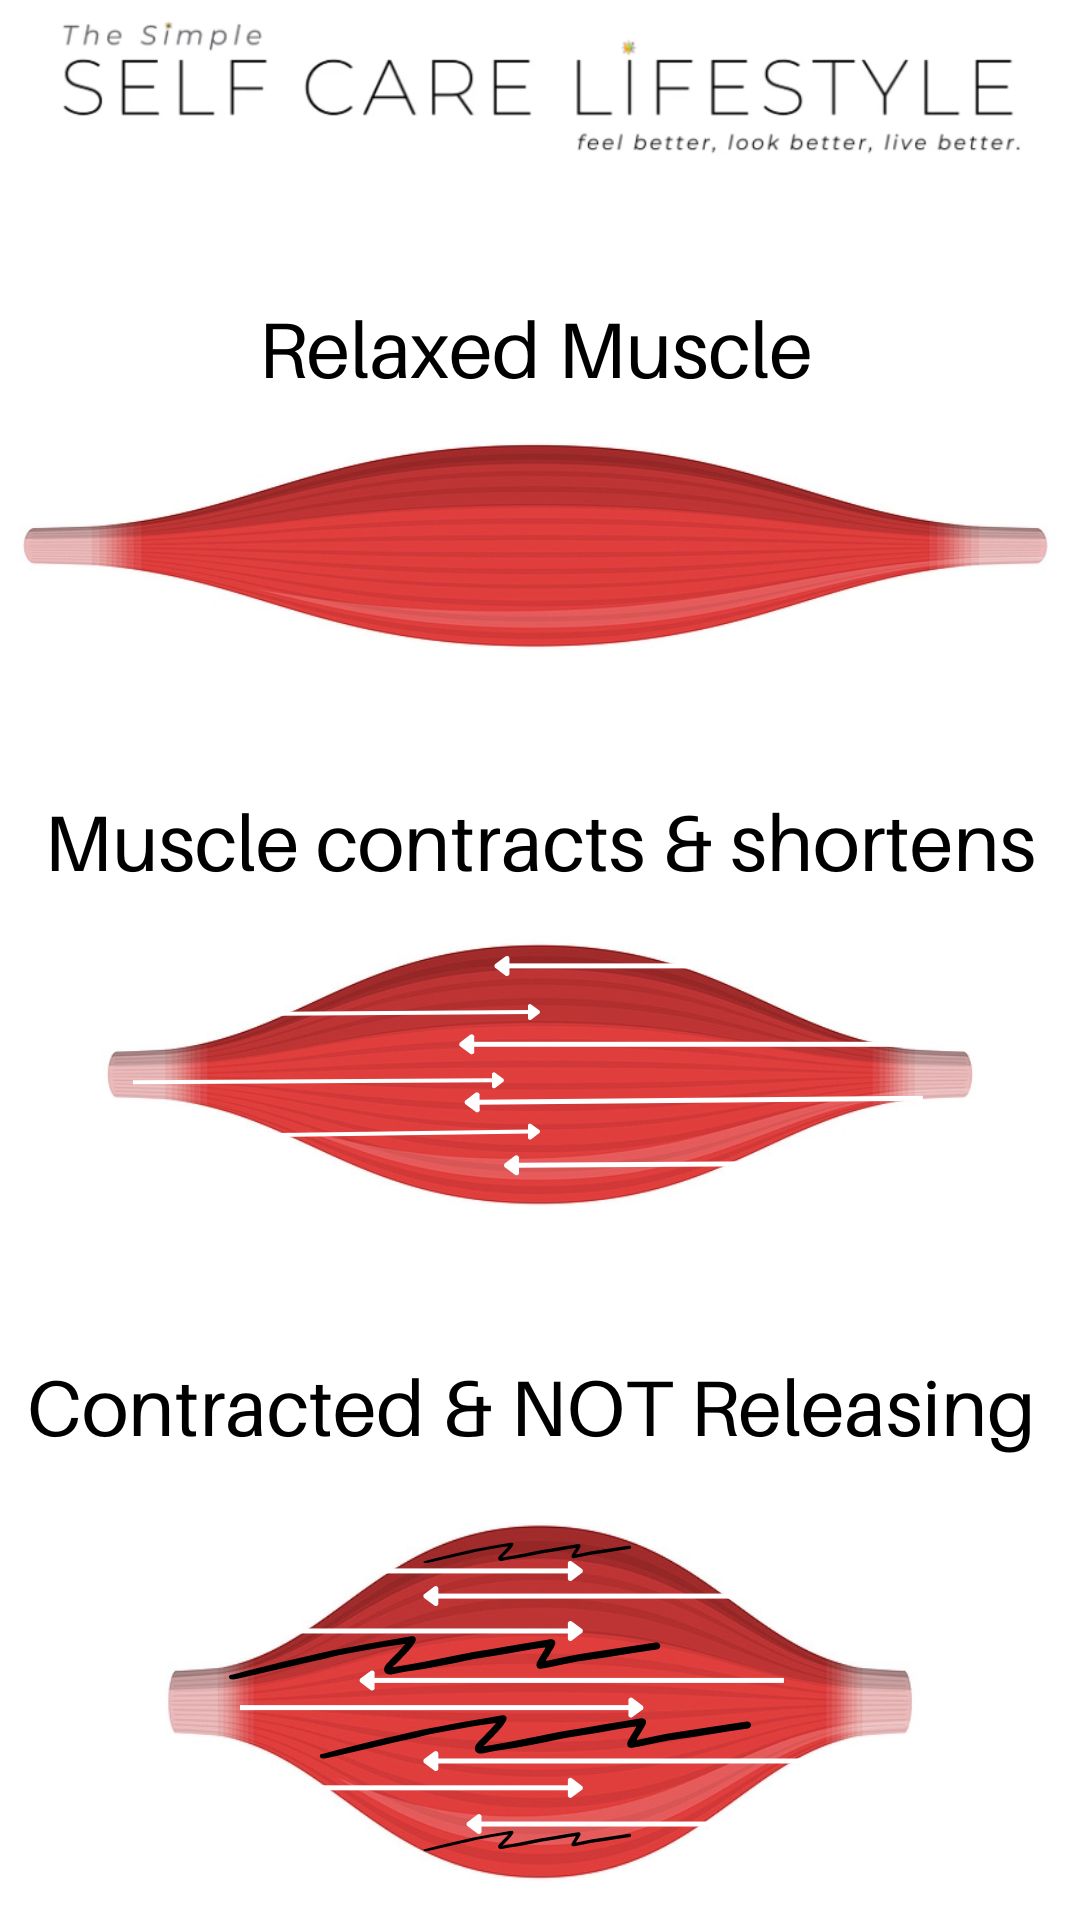 Relieving Muscle Cramps: 3 Muscle illustrations. 1. Relaxed, 2. contracting. 3rd cramping stuck in contracted position.